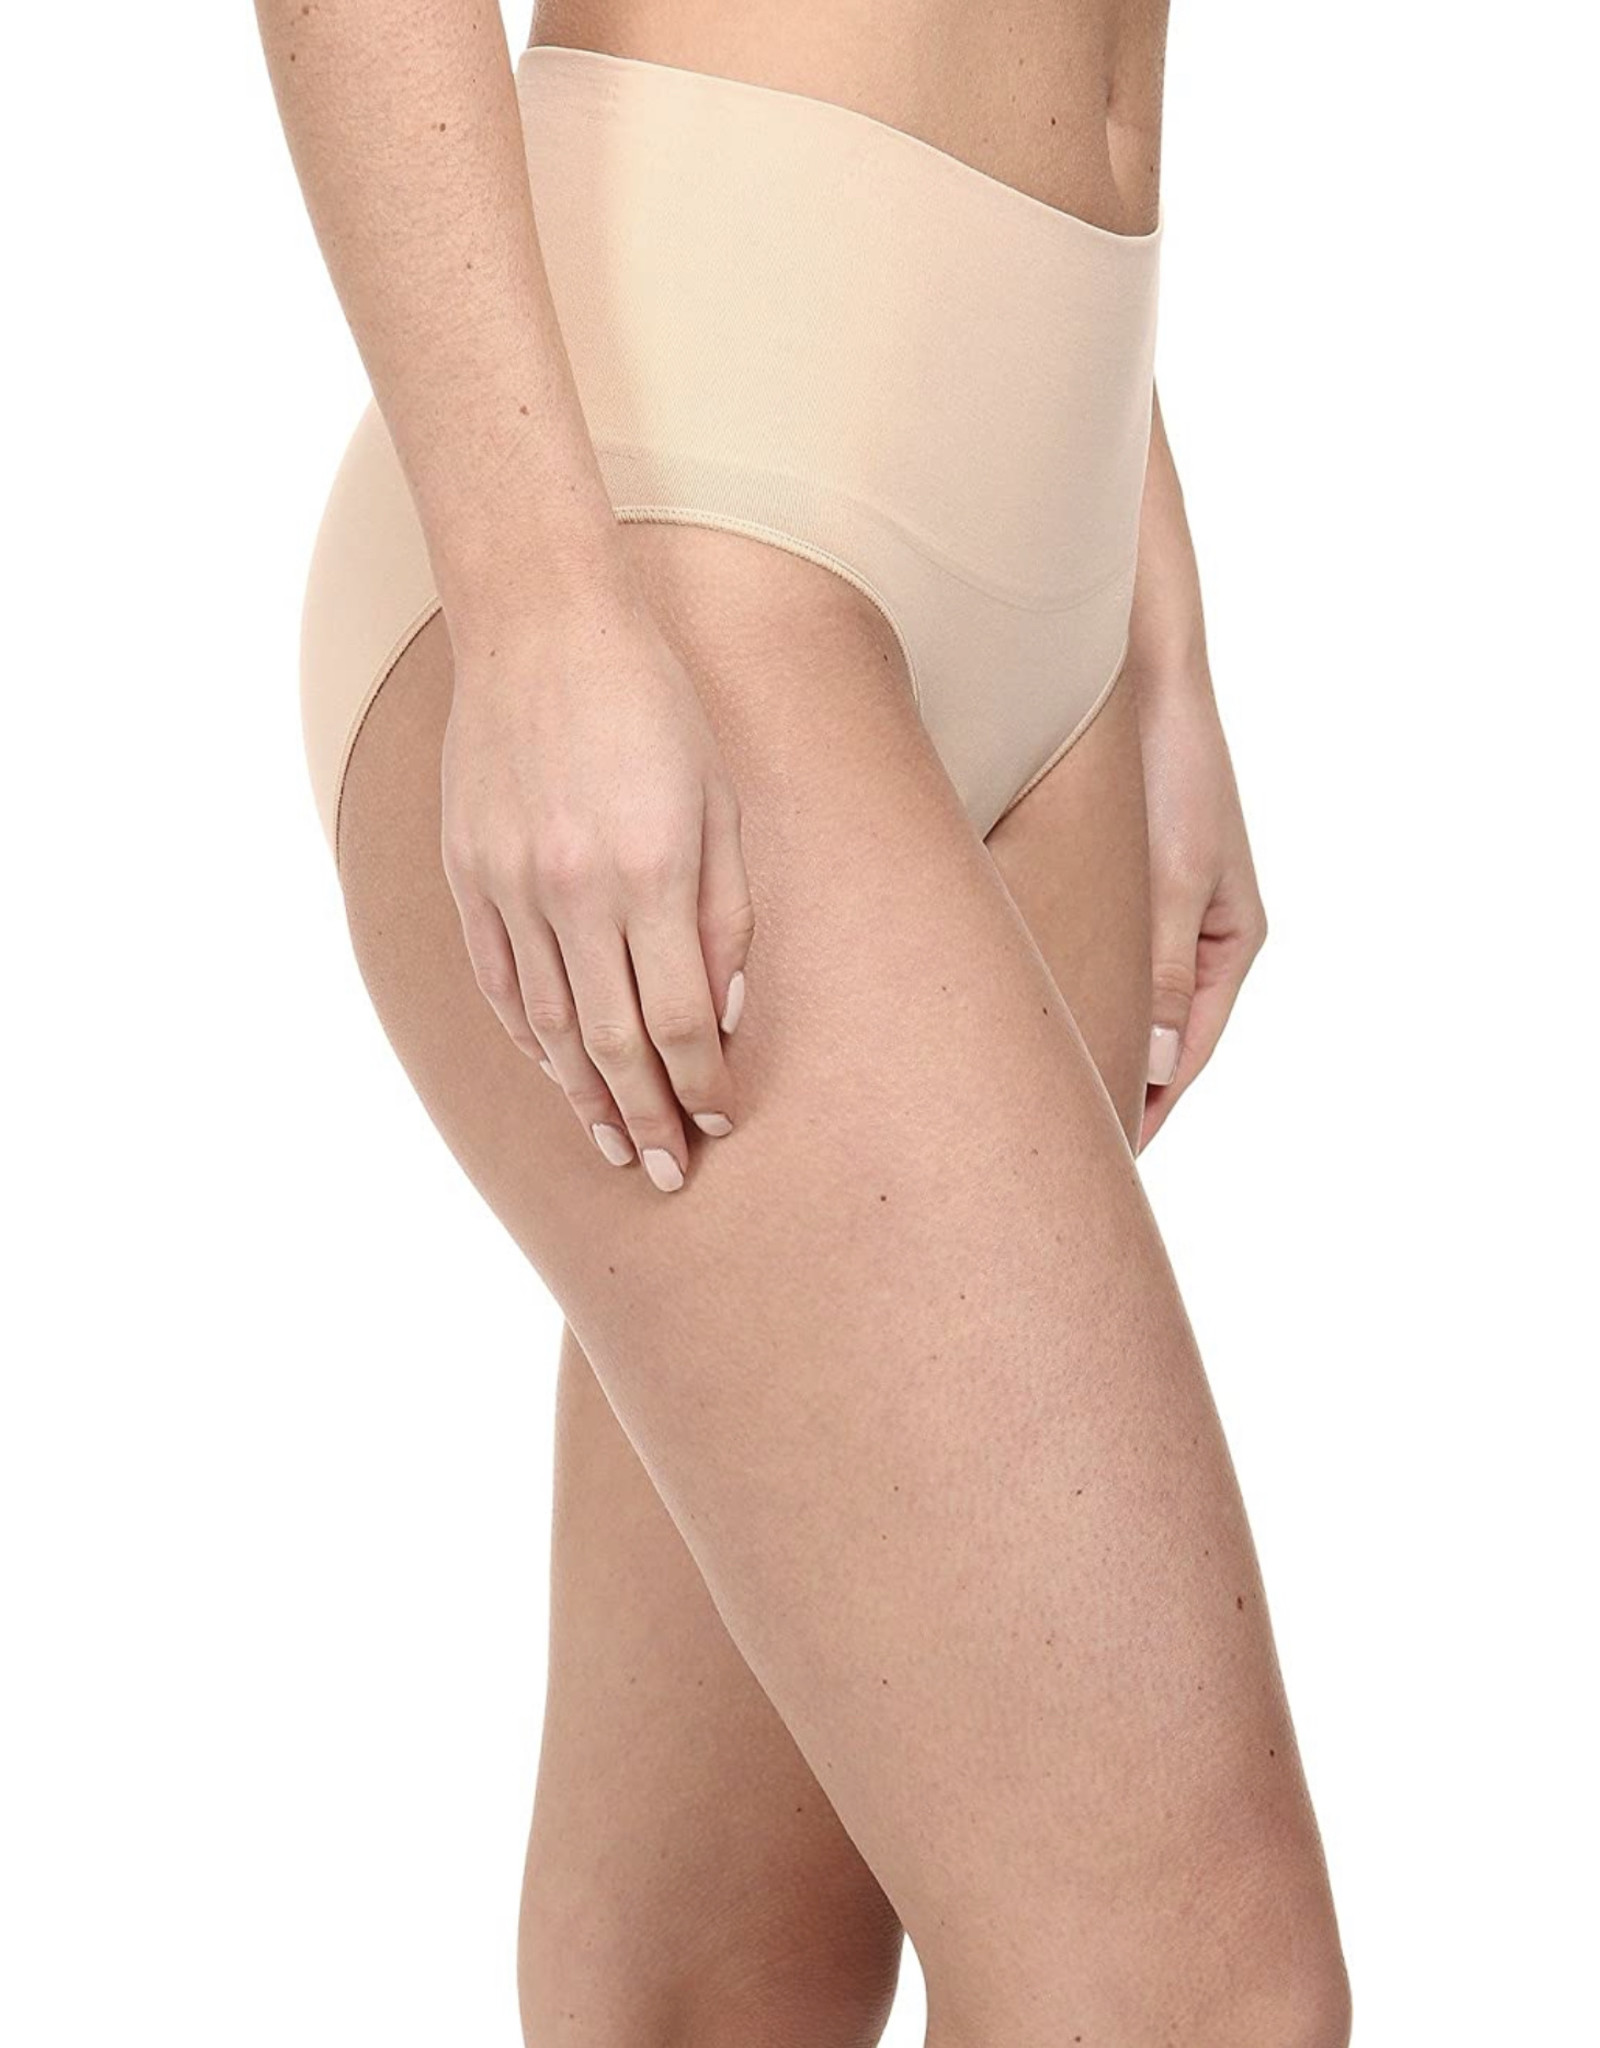 Spanx Everyday Shaping Panties Brief #SS0715 - In the Mood Intimates